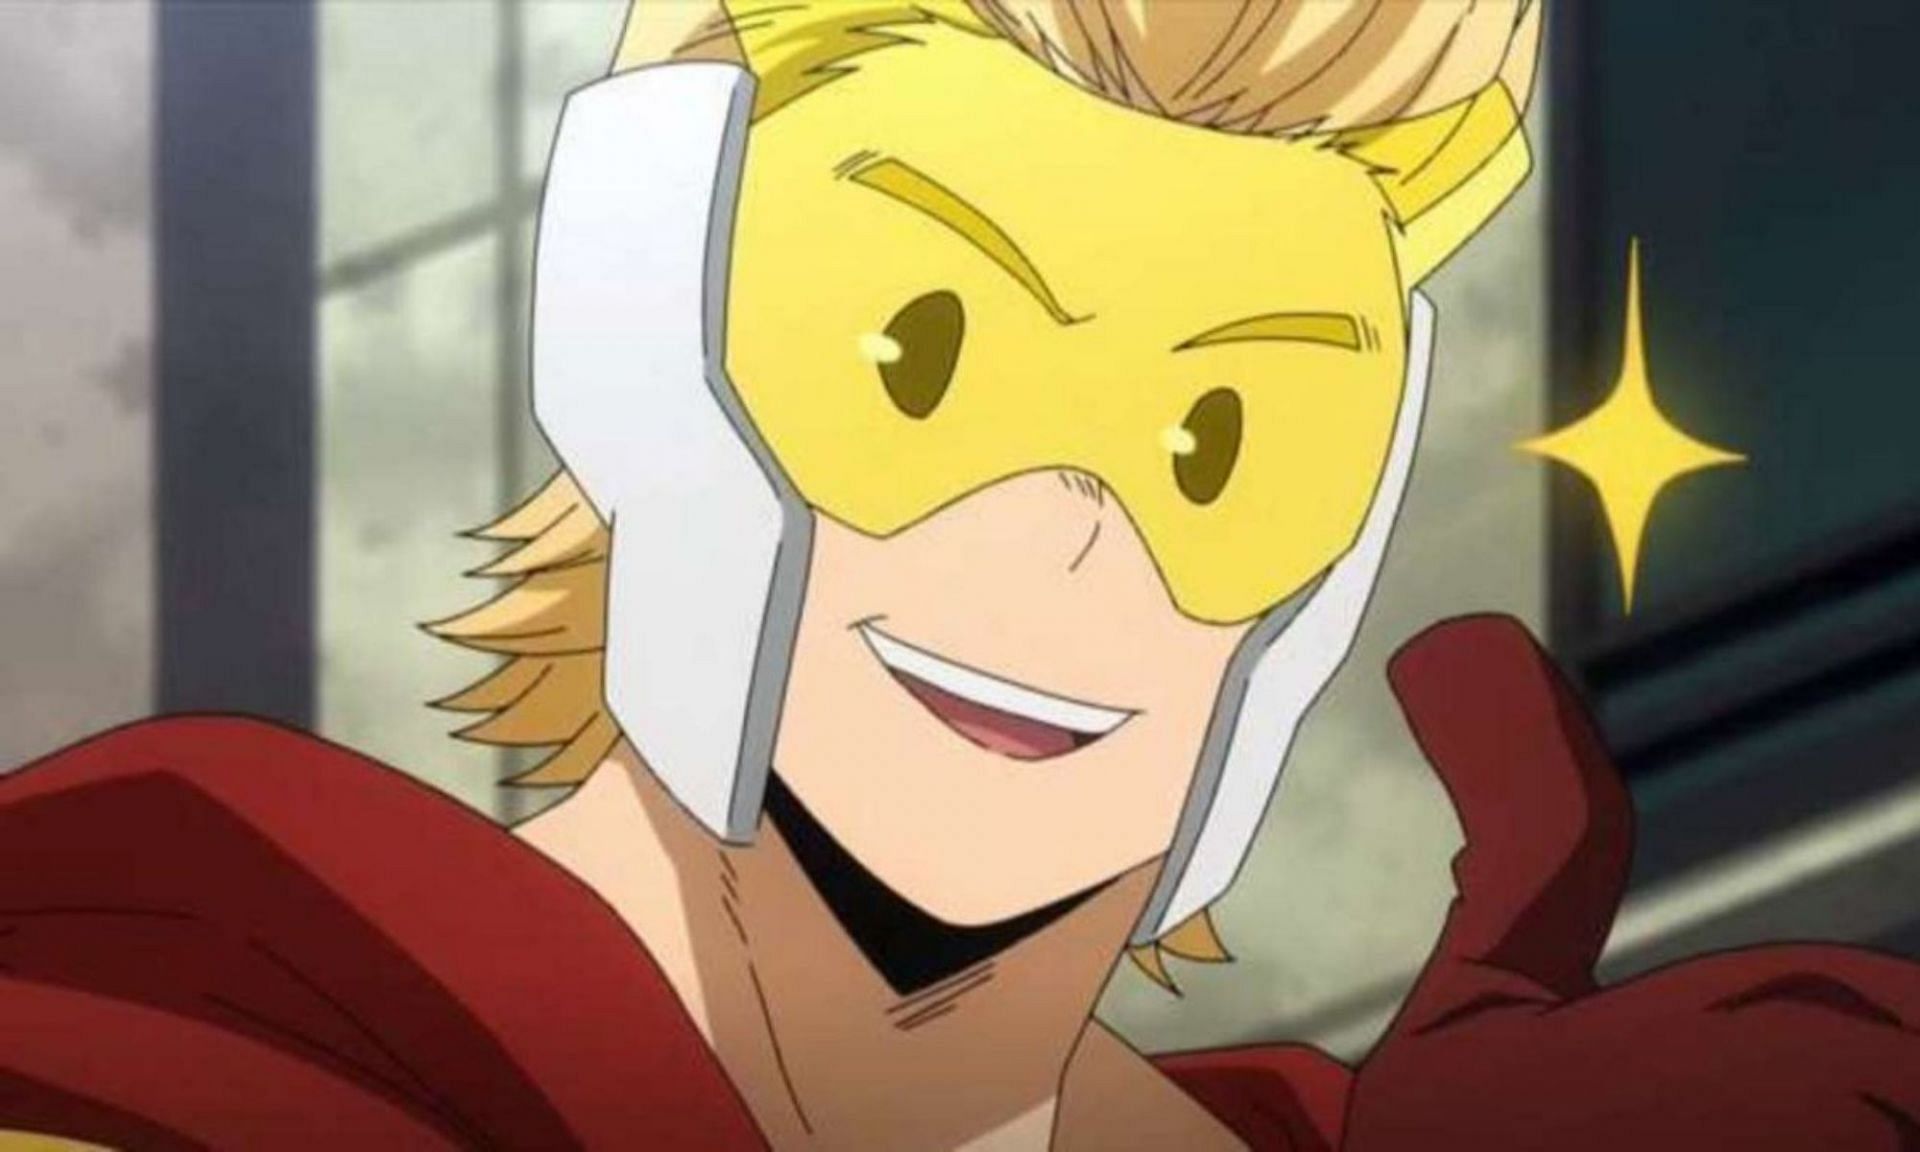 Mirio lives by the words of Sir Nighteye